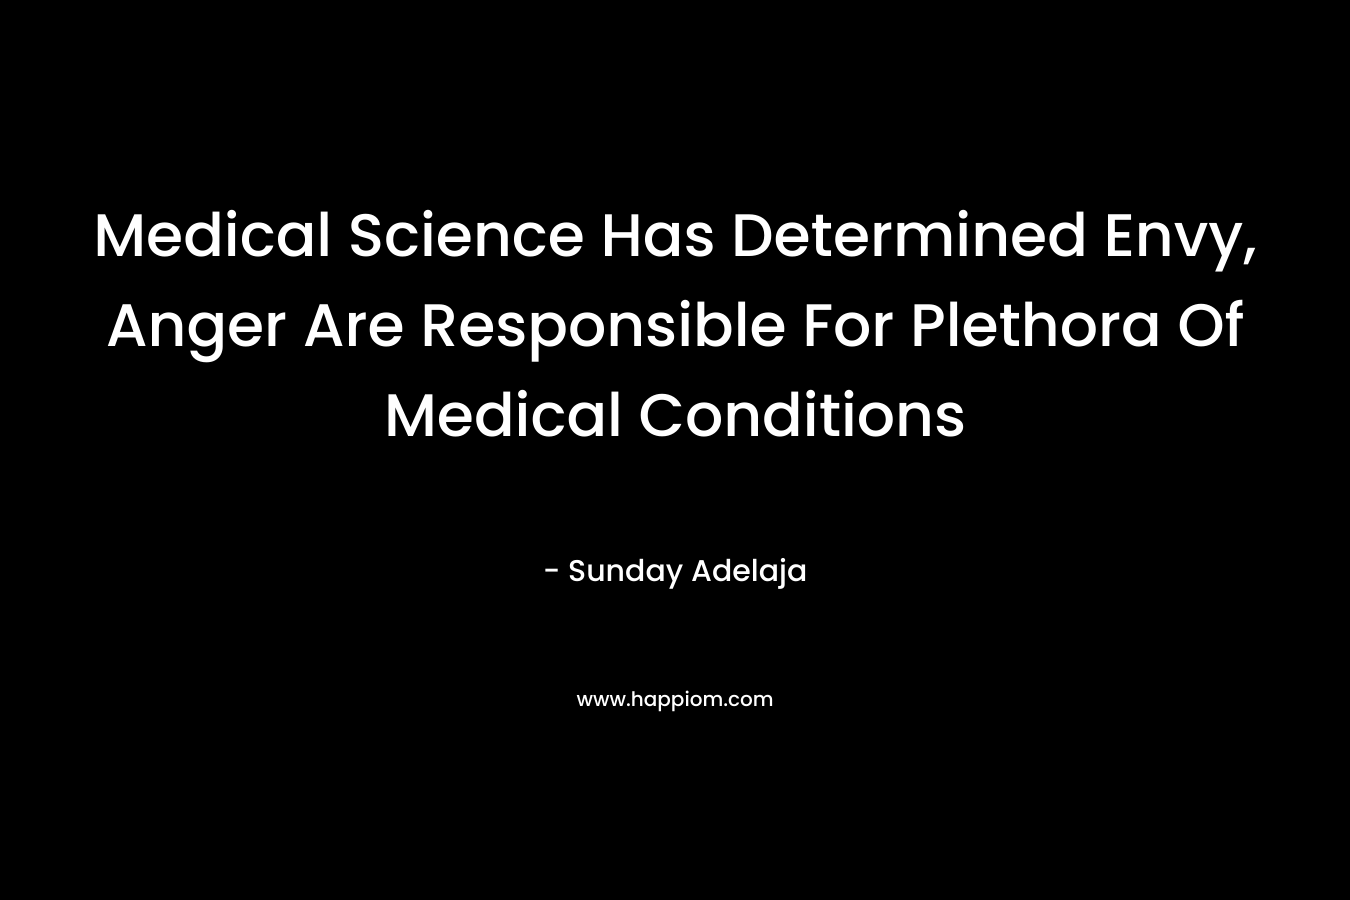 Medical Science Has Determined Envy, Anger Are Responsible For Plethora Of Medical Conditions